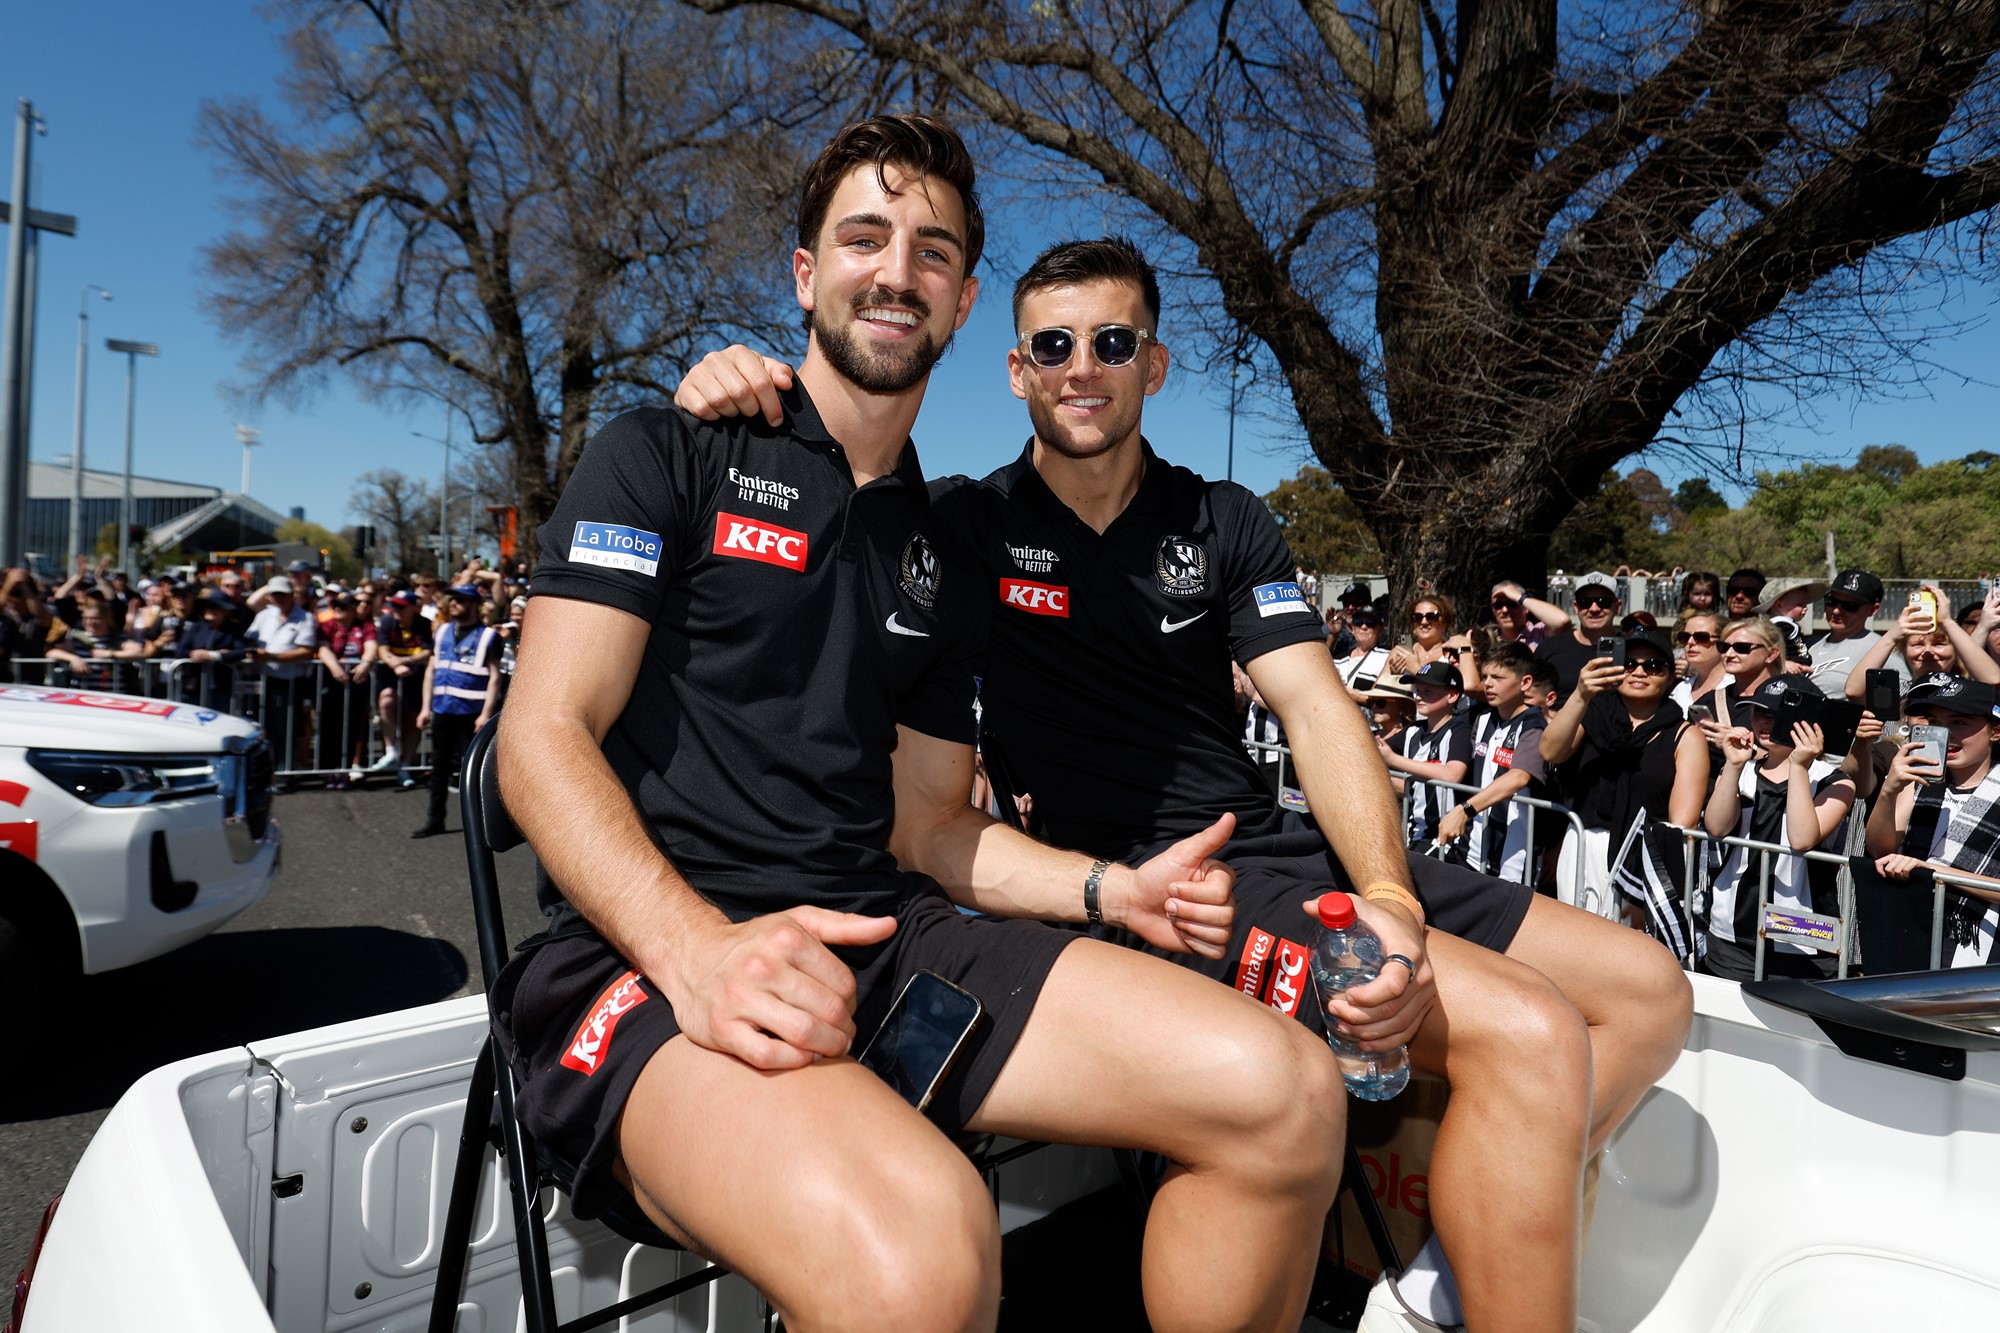 Josh and Nick smile for a photo while they sit on chairs on the back of a ute.